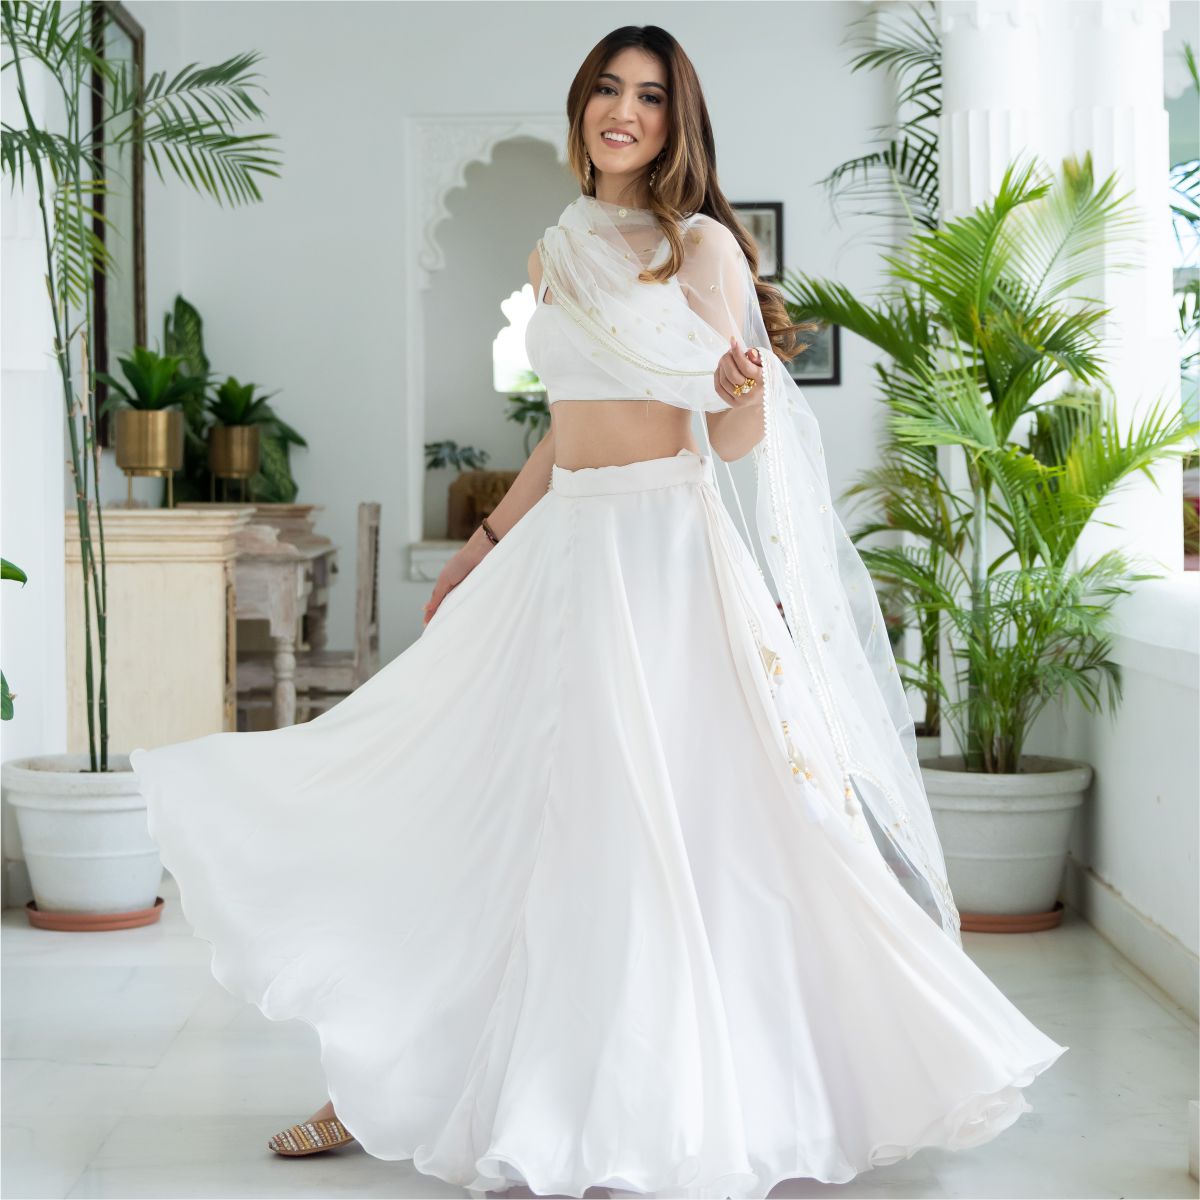 21+ Brides Who Wore White Outfits On Their Haldi Ceremony | Haldi outfit, Haldi  outfit for bride, Cute prom dresses